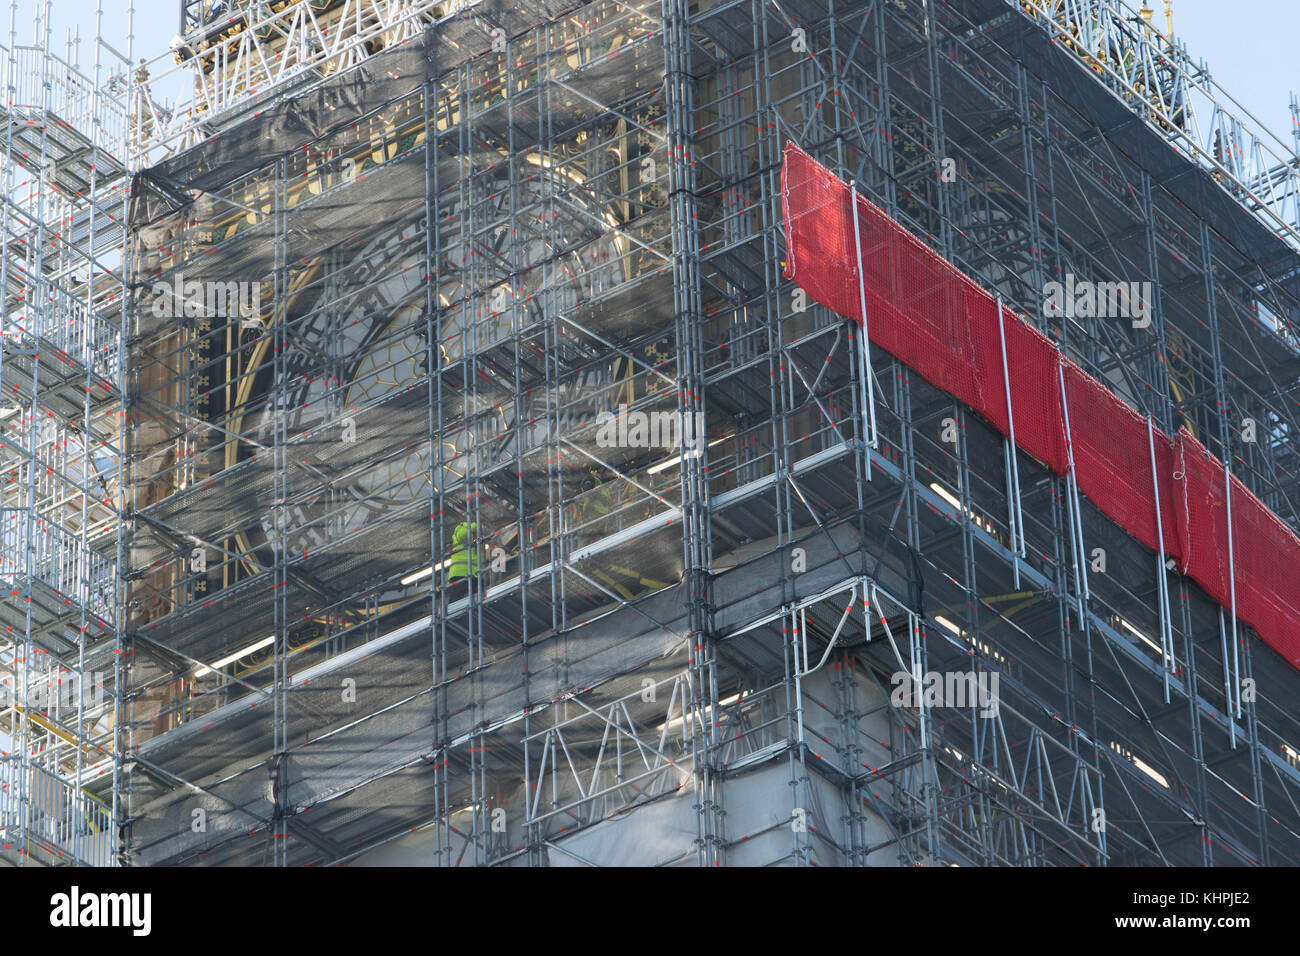 LONDON, UK - October 17th, 2017: close up of Scaffolding around the Elizabeth Tower, more commonly known as Big Ben, during the extensive restoration and repairs of the Houses of Parliament. Stock Photo